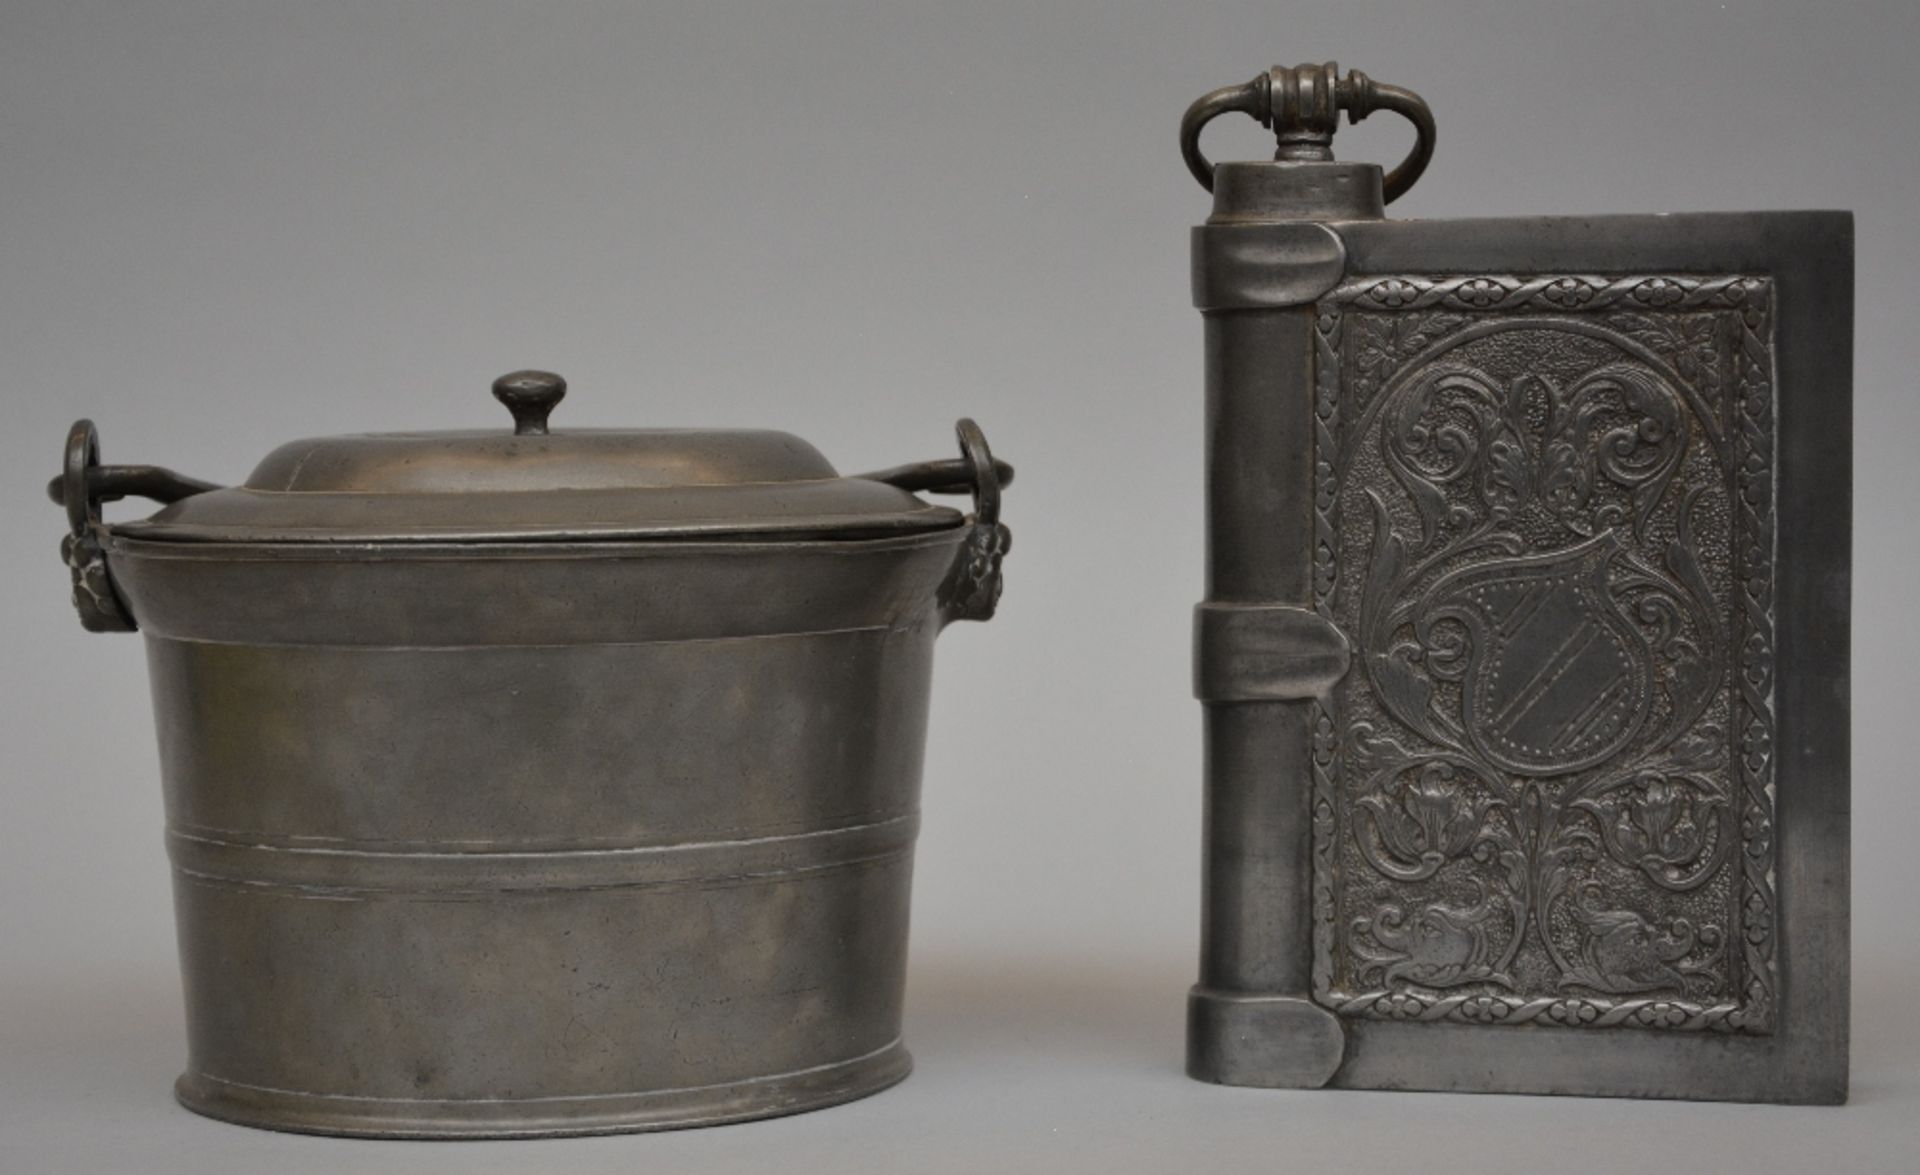 A 19thC French pewter feet warmer and a ditto food recipient, H 6 - W 26 - D 15cm / H 23 -